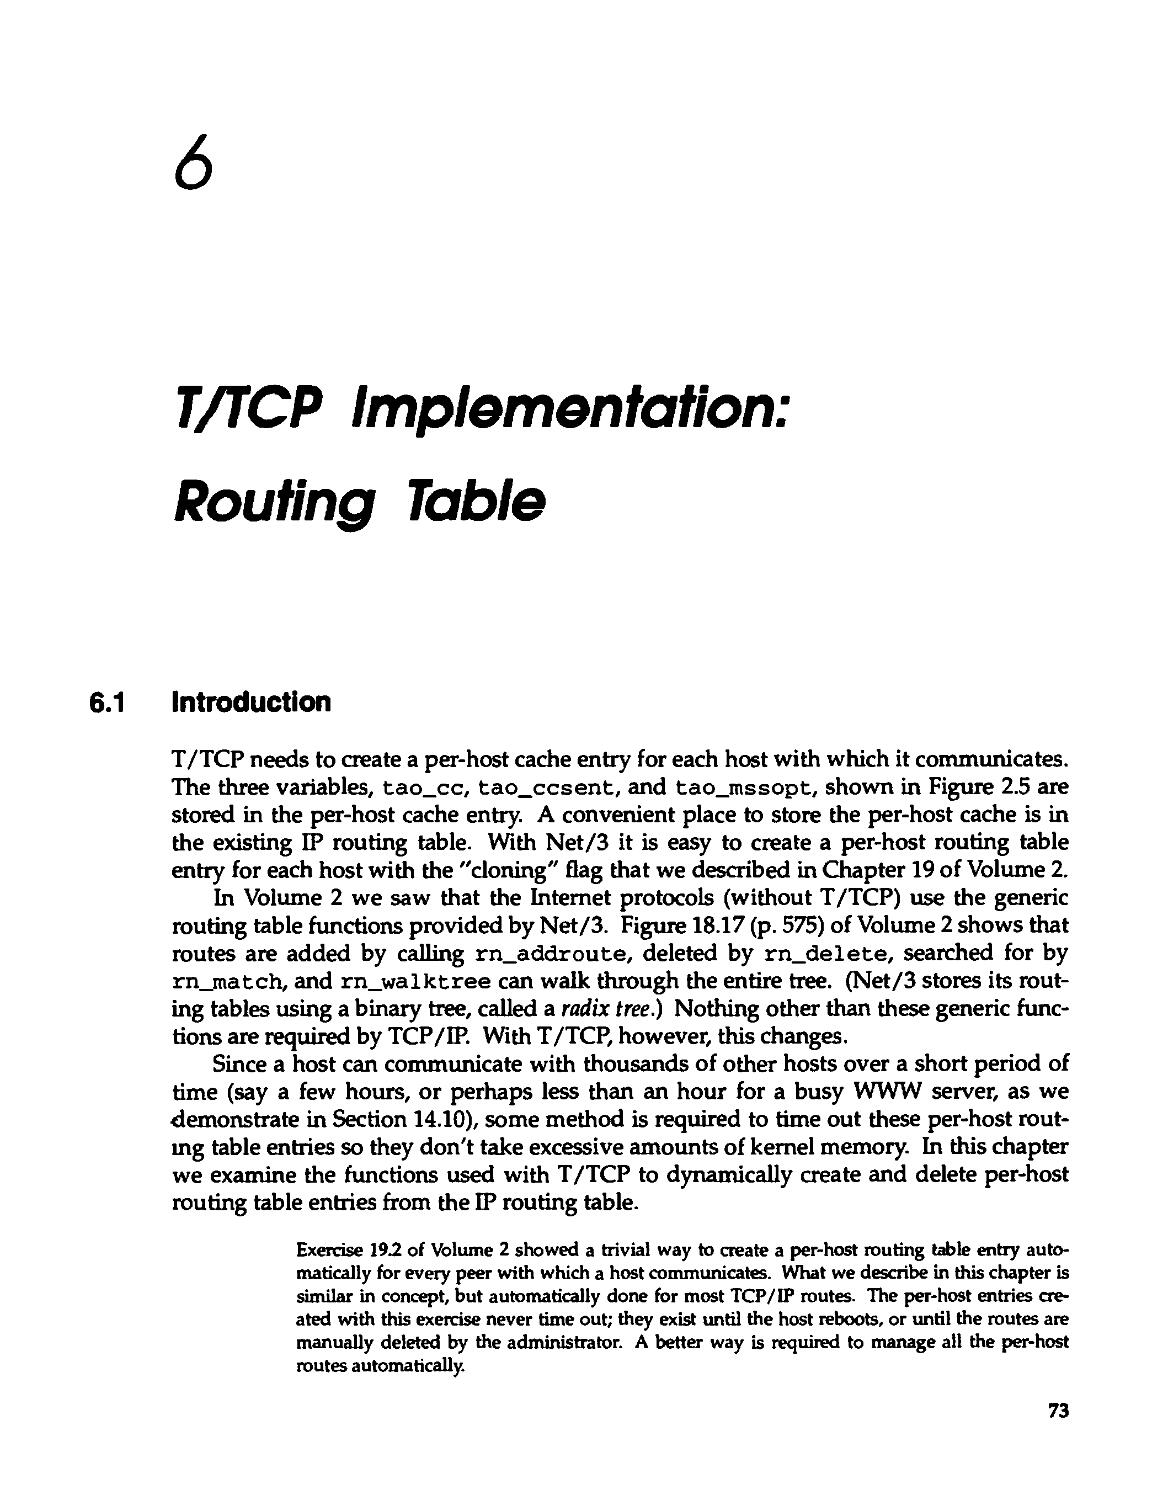 Chapter 6. T/TCP implementation: Routing Table